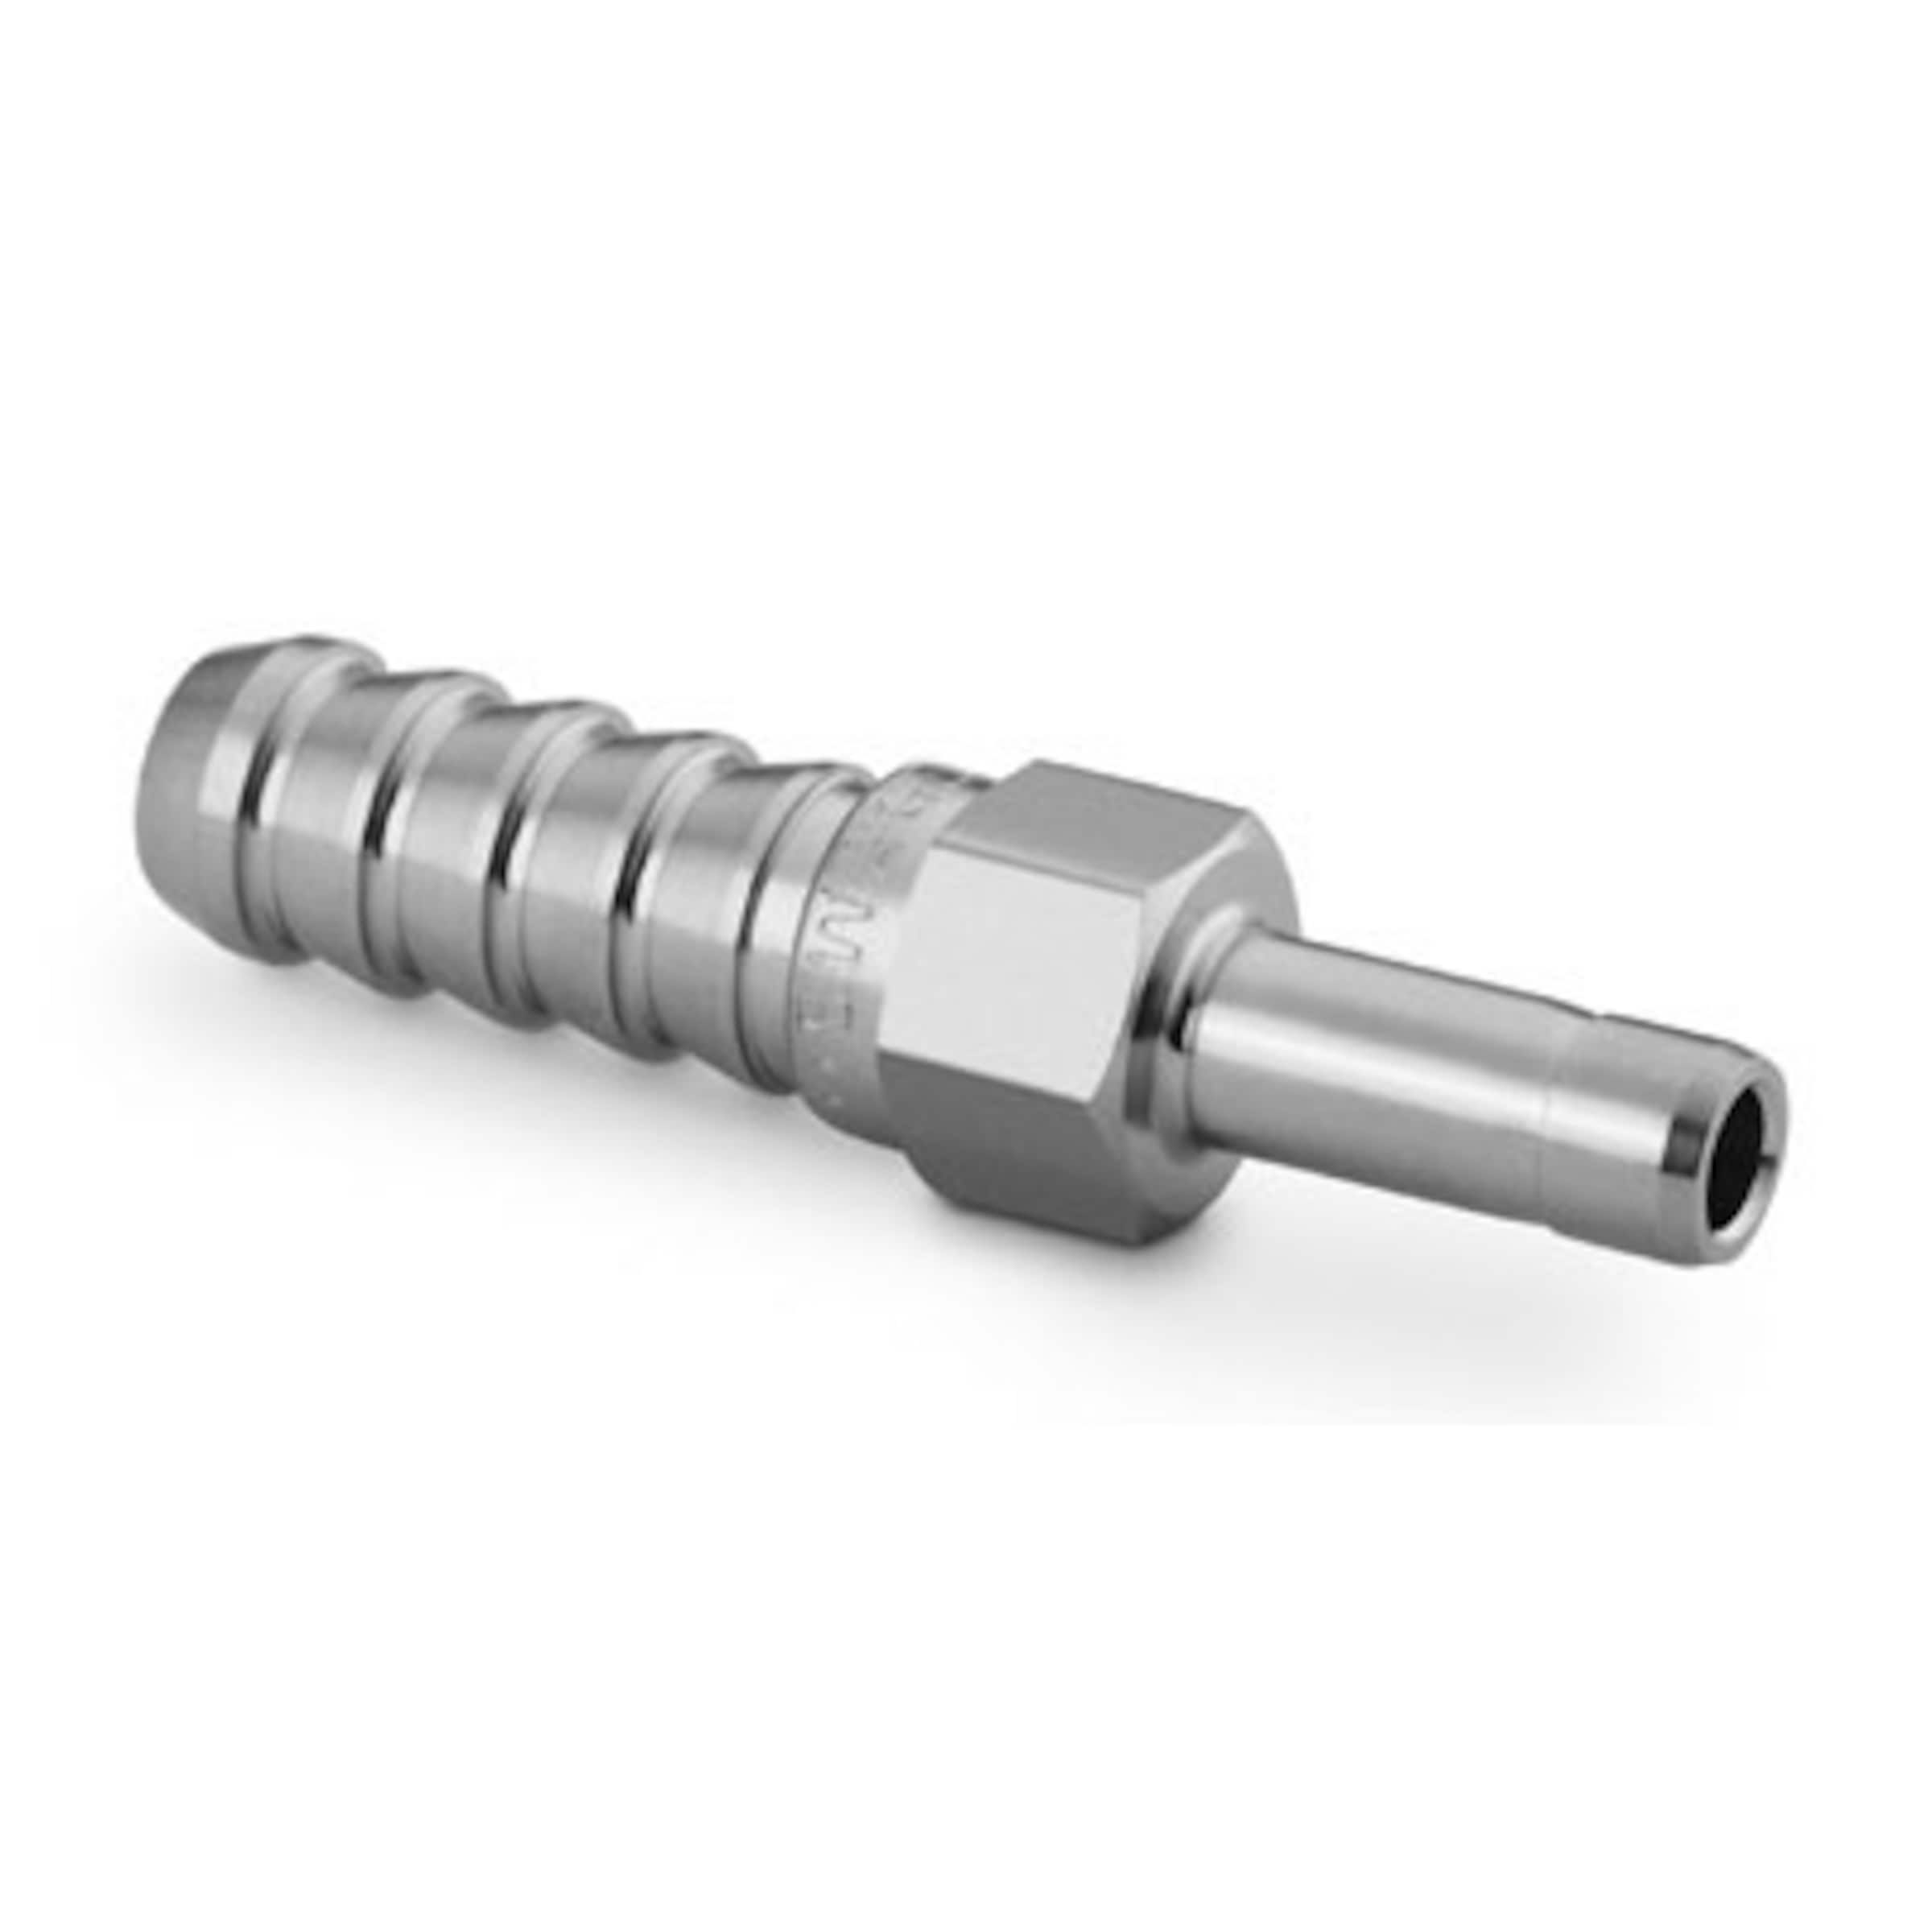 Viton Seal Faster Coupling VVS114 Gas M 2V Heavy Duty Screw Type Stainless Steel 1-1/4 x 1-1/4 BSPP Male 